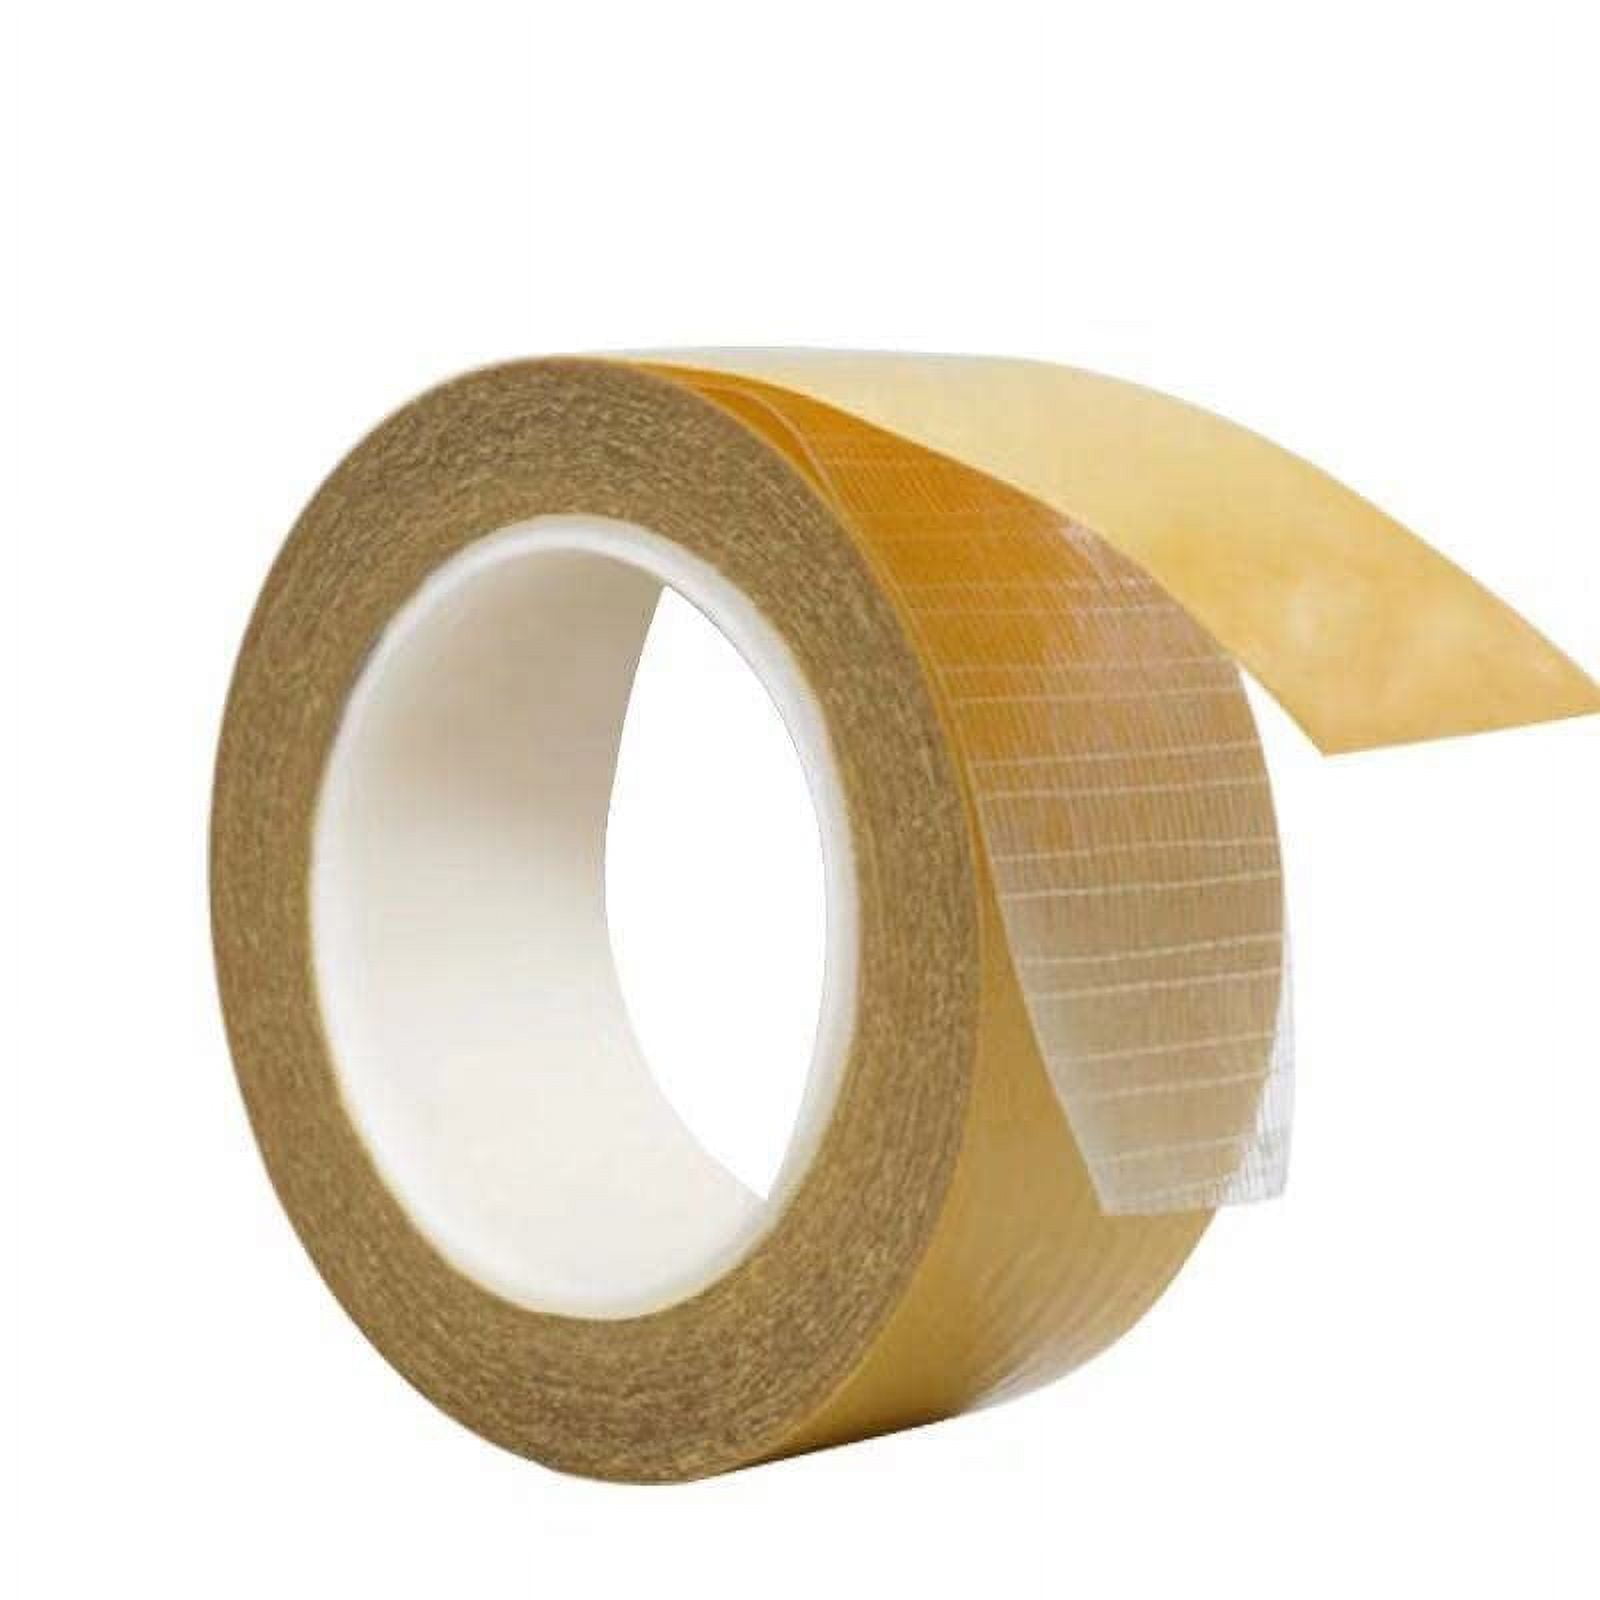 Aneaseit Double Sided Carpet Tape for Area Rugs, Comes with Cutting Tools, Extra Strong Non-Skid Sticky Tape for Mats, Rugs, Carpets and